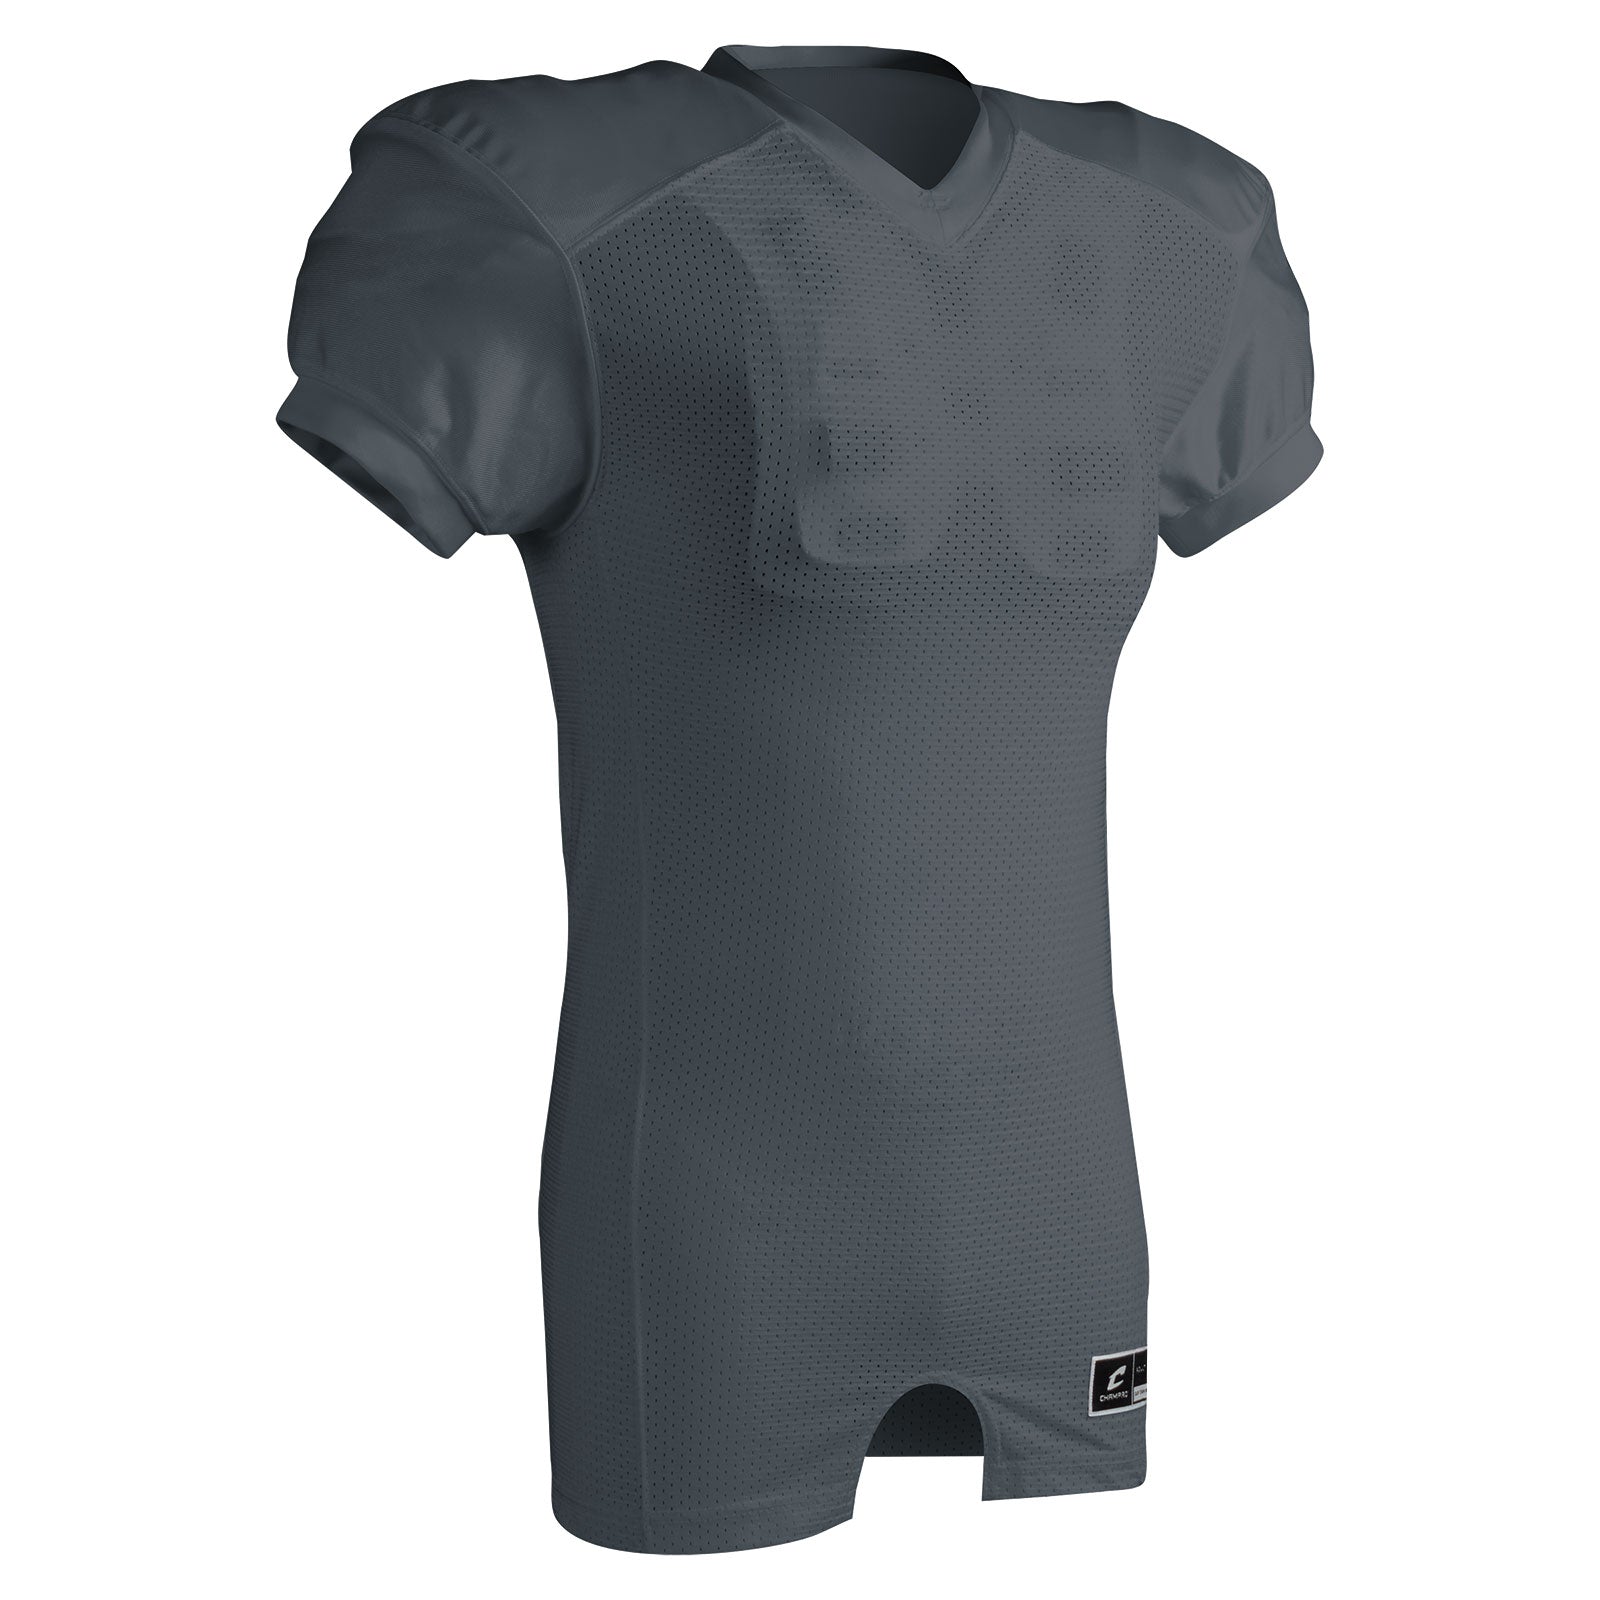 Pro-Fit Collegiate Fit Football Game Jersey GRAPHITE BODY